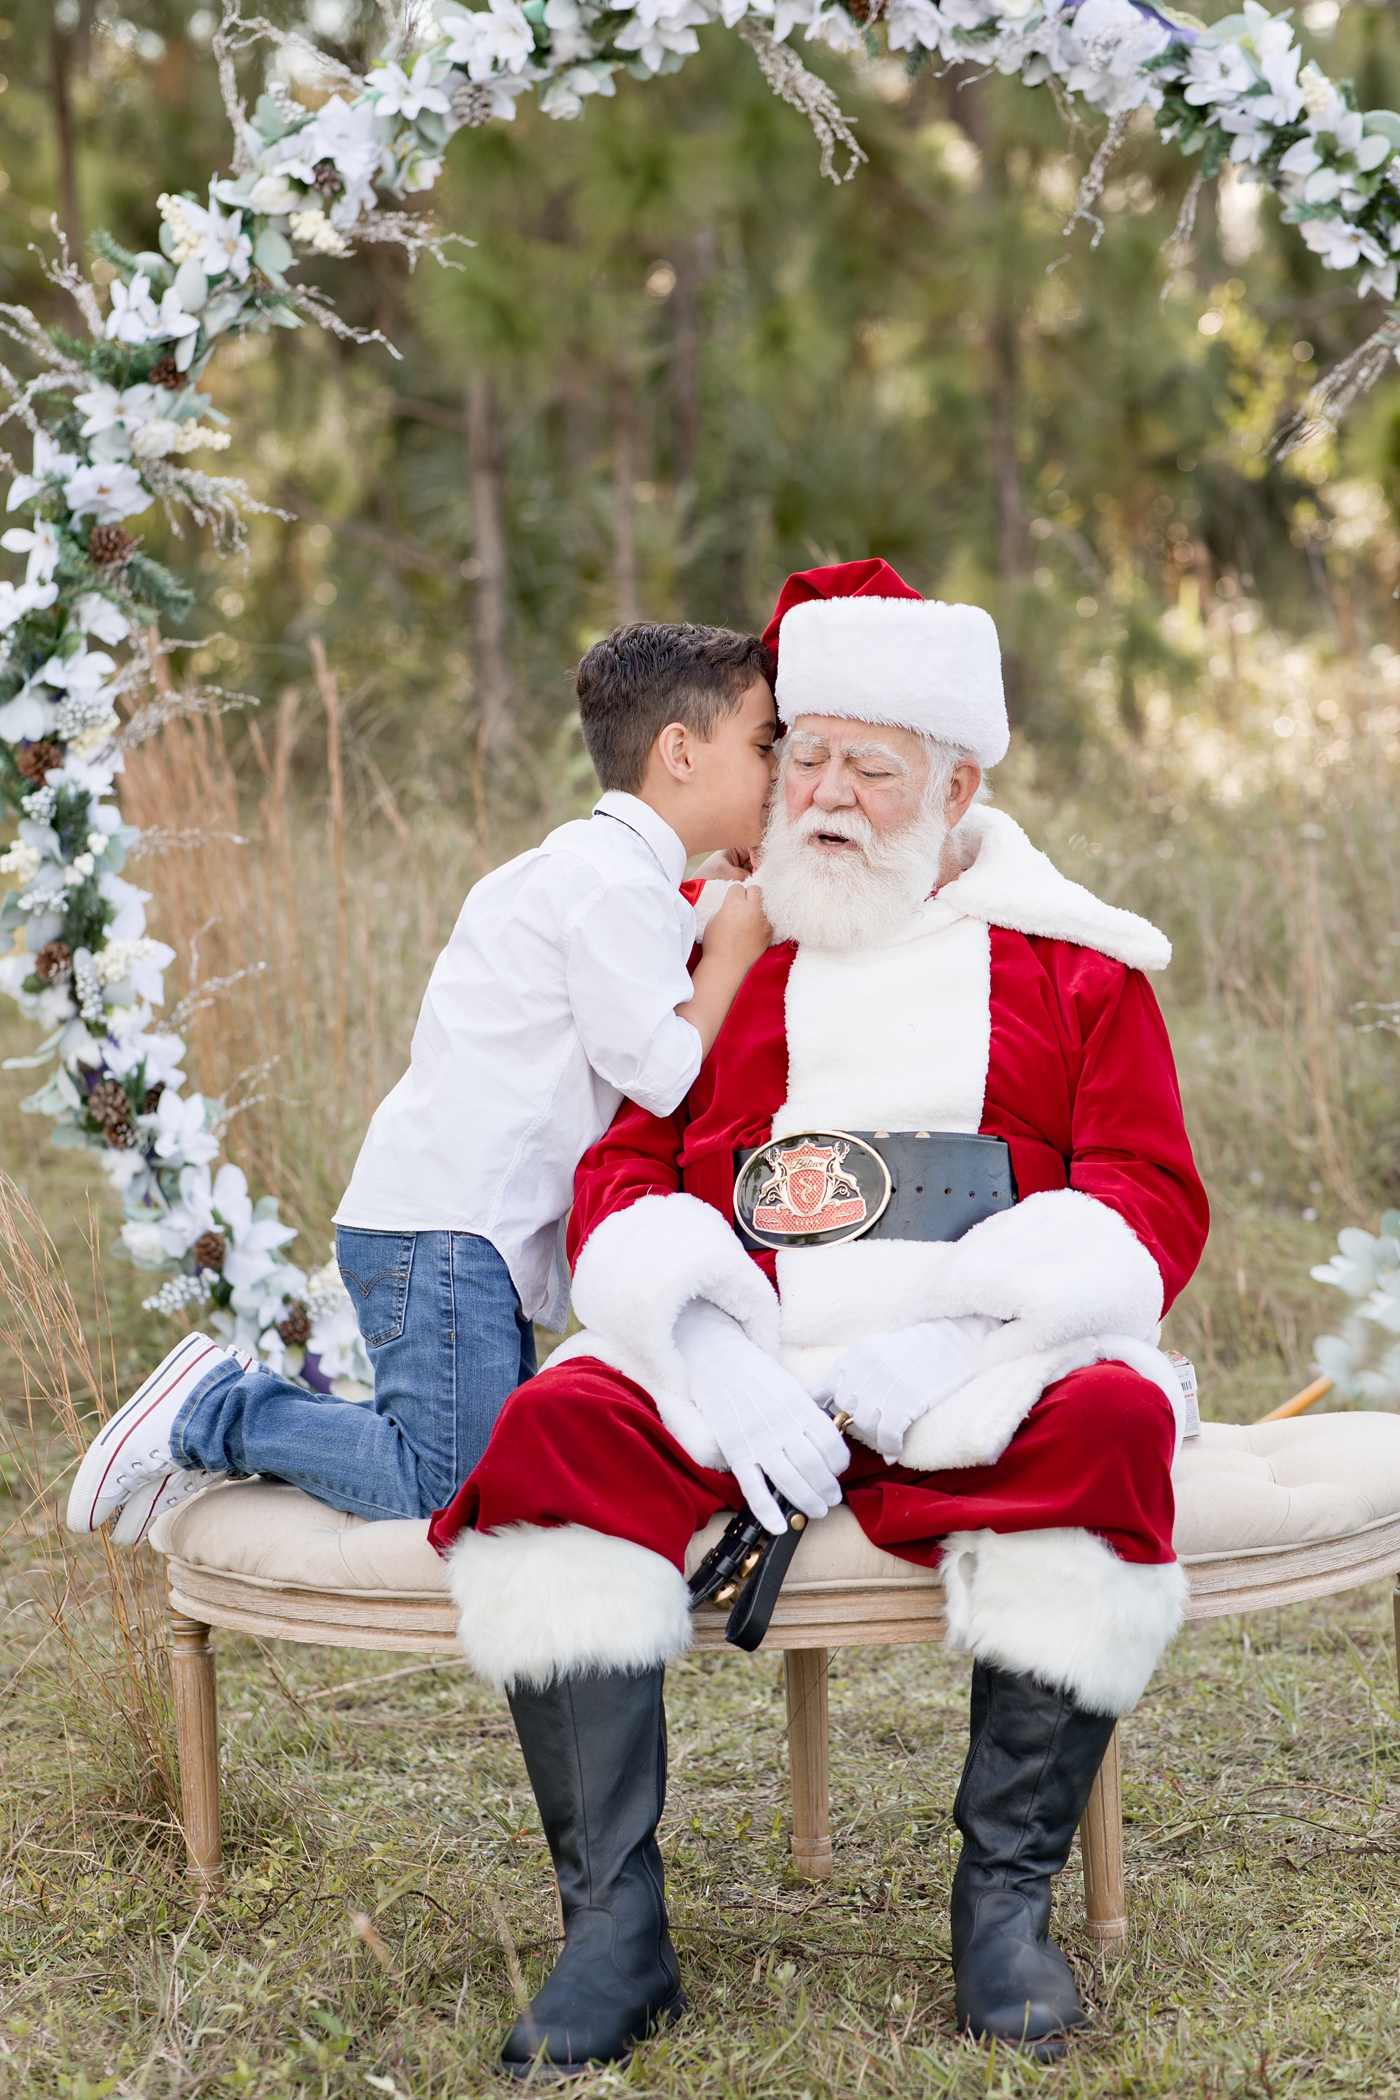 Little boy whispers secret to Santa Claus during Miami Santa session. Photo by Ivanna Vidal Photography.